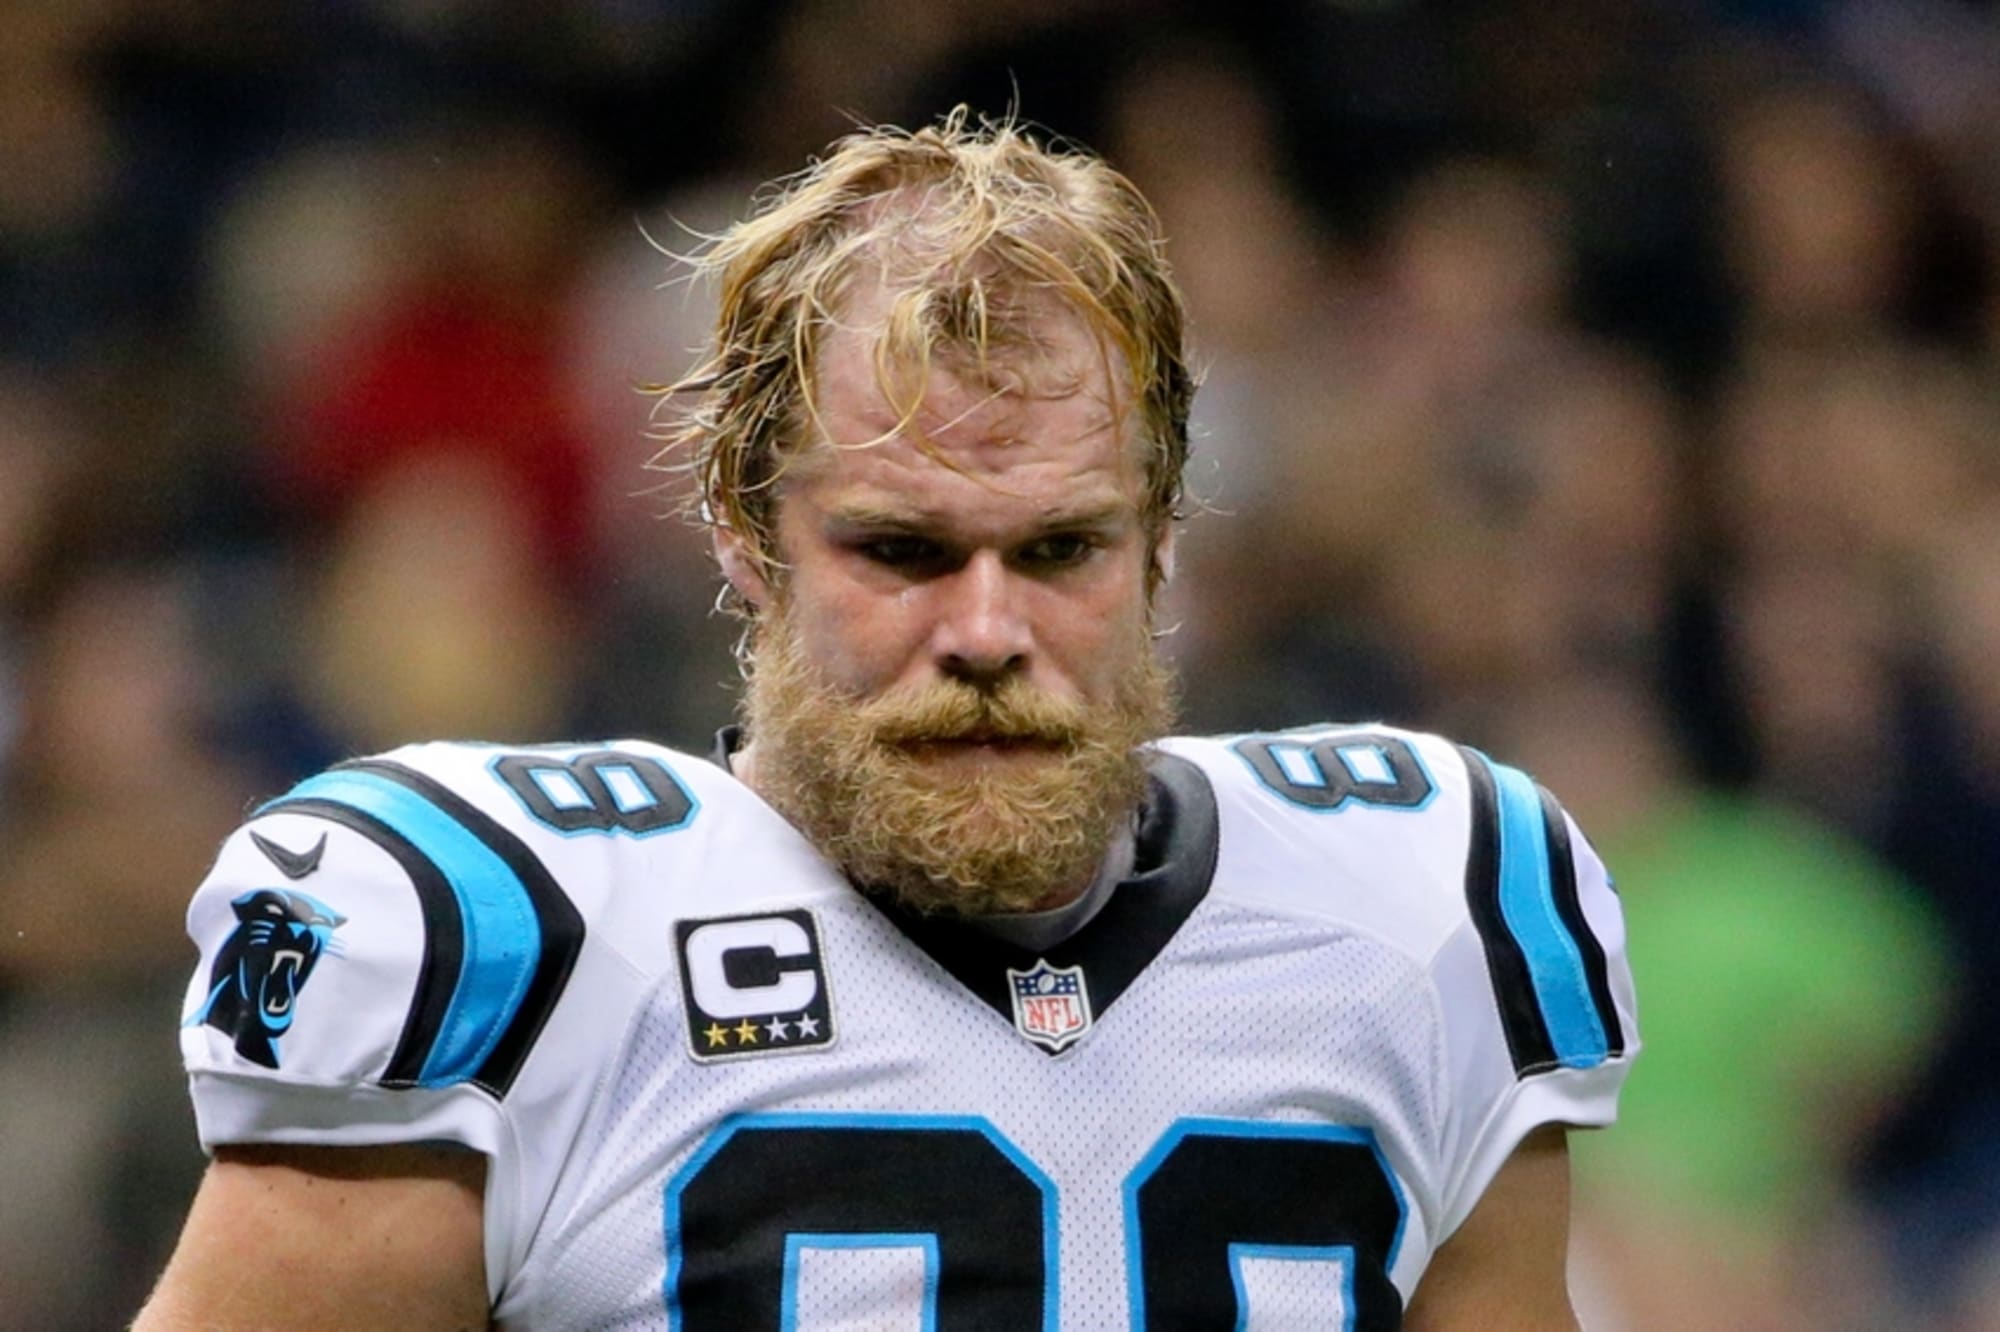 Greg Olsen might not dab, but his son is totally into it (Video)